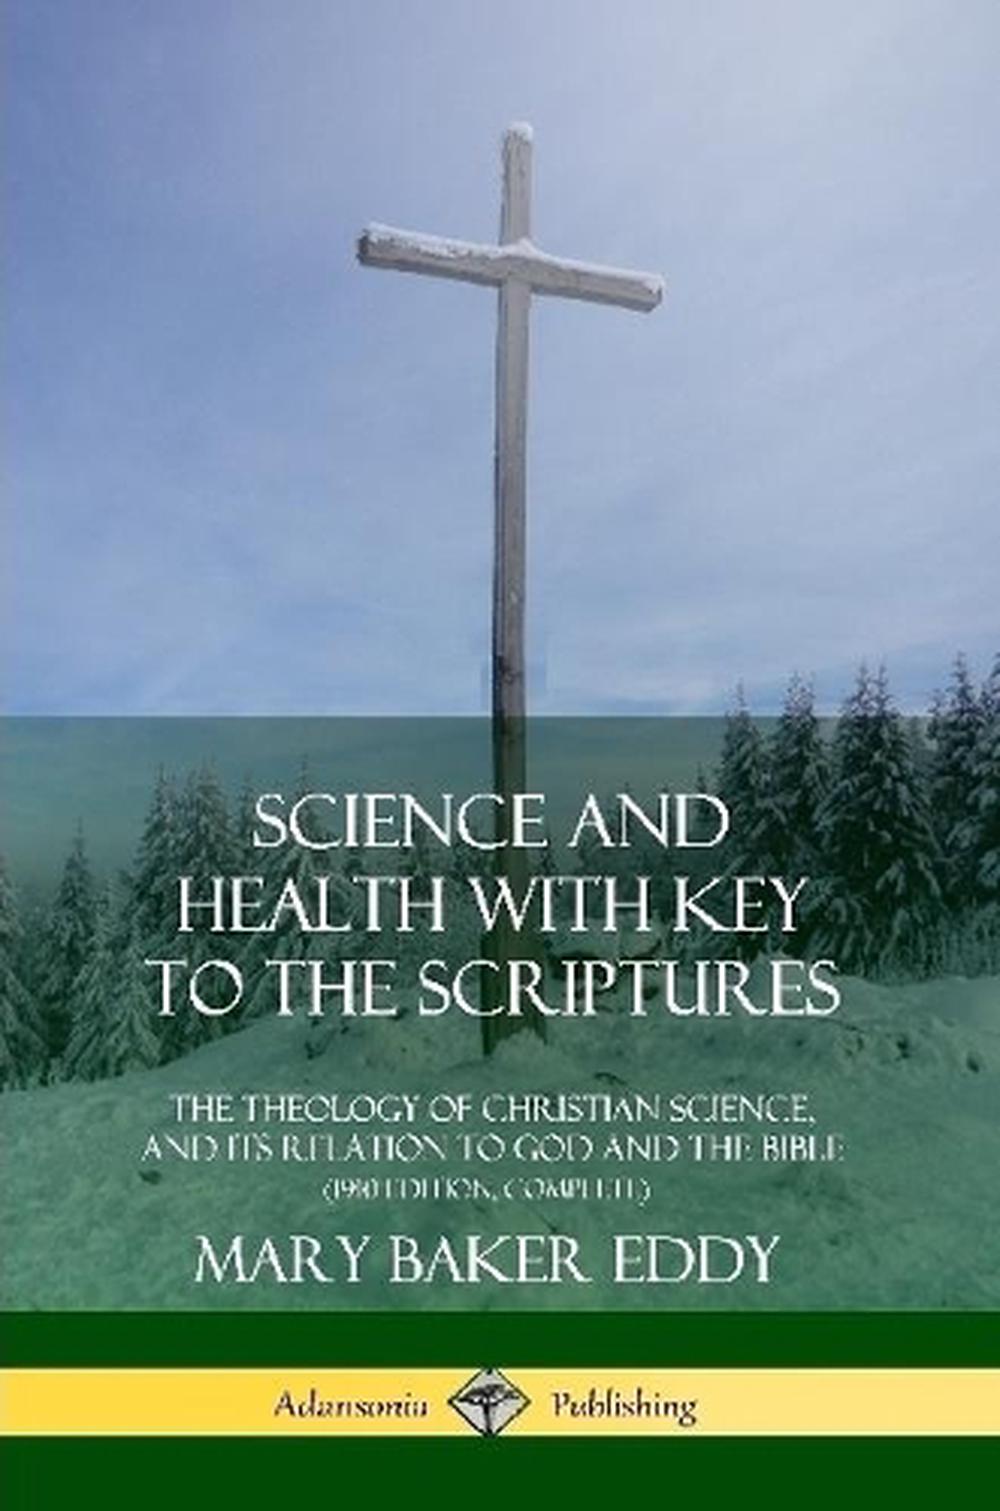 science and health with key to the scriptures by mary baker eddy